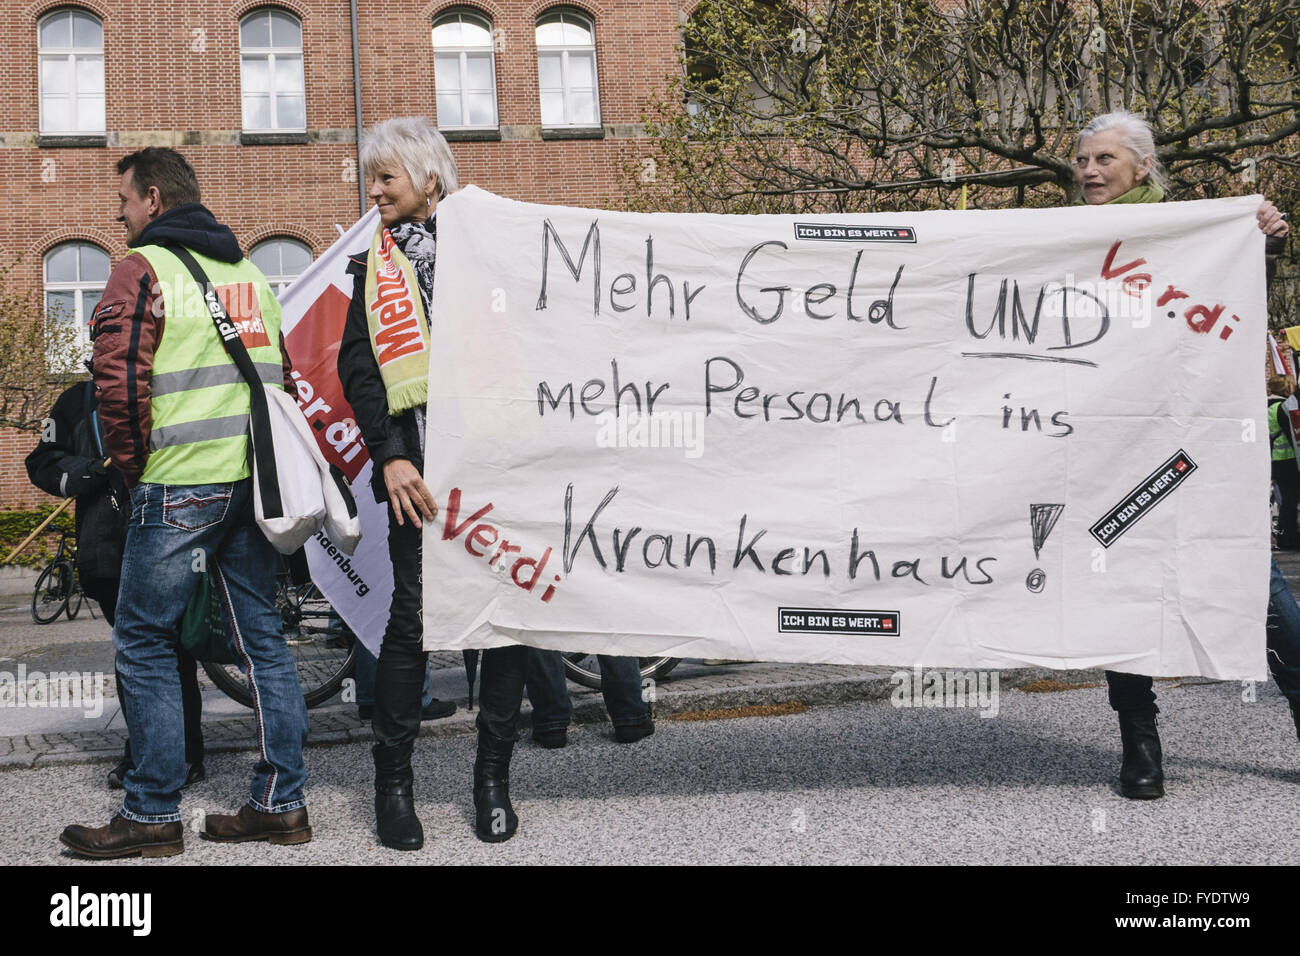 Berlin, Berlin, Germany. 26th Apr, 2016. Protesters during the demonstration of employees of Charite and Vivantes. The trade union ver.di has again expanded the scope of strikes in the civil service. Verdi asks six percent more pay for workers in the trade dispute, the third round of negotiations is scheduled for April 28 and 29, 2016 in Potsdam, Germany. Credit:  Jan Scheunert/ZUMA Wire/Alamy Live News Stock Photo